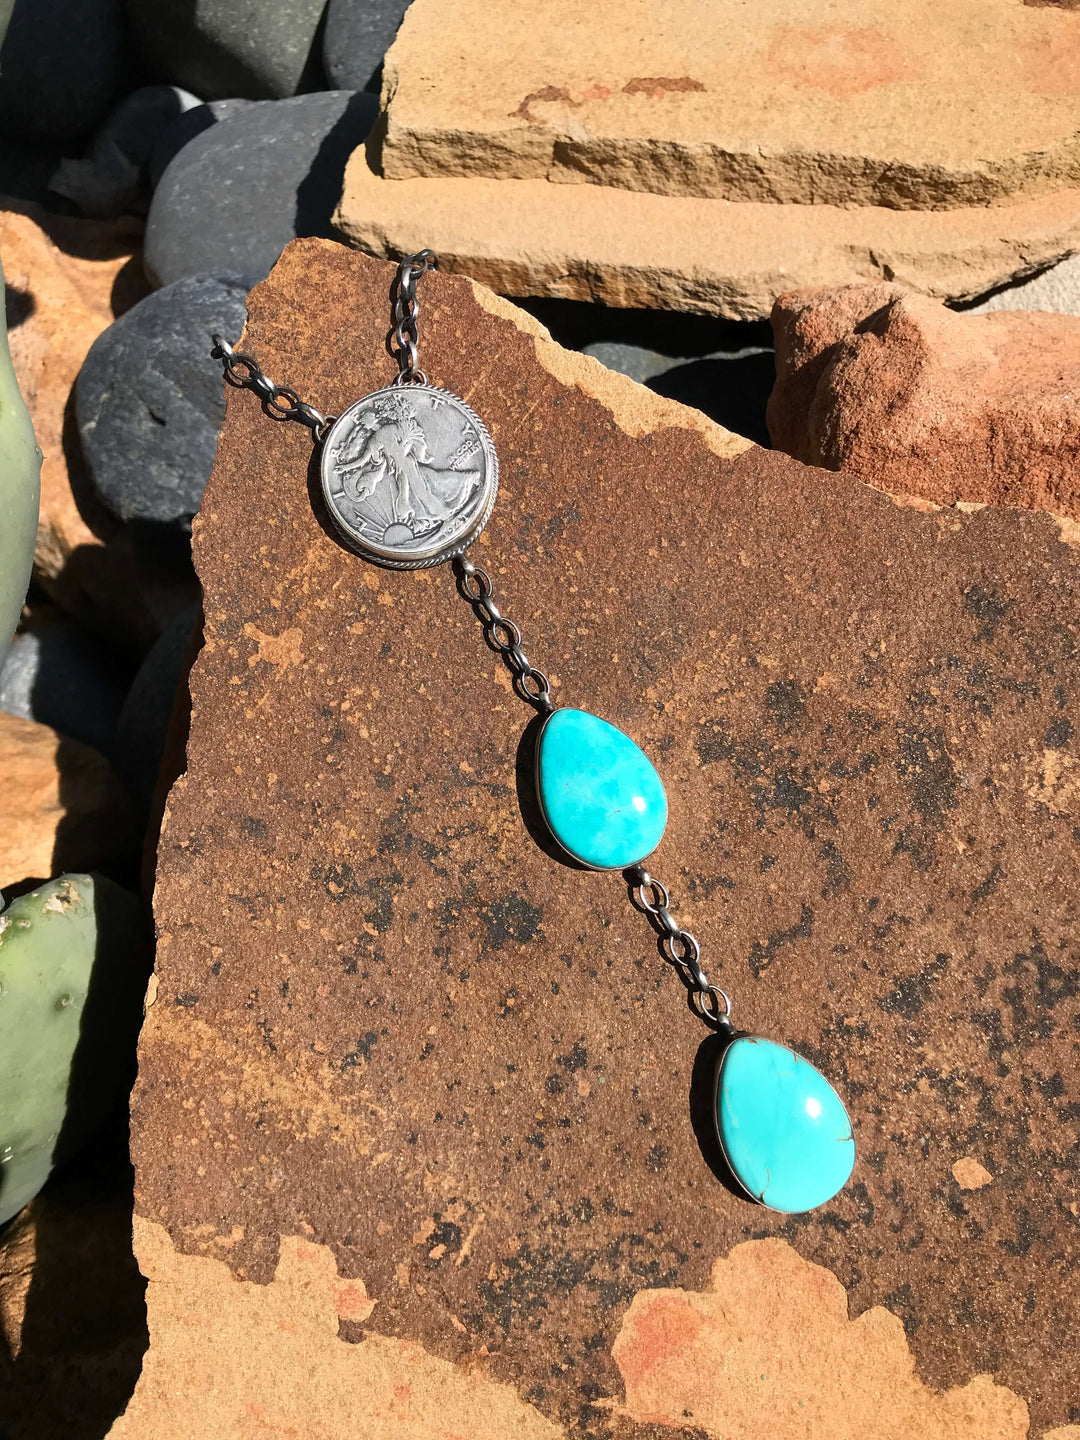 The Coin Turquoise Lariat Necklace, 3-Necklaces-Calli Co., Turquoise and Silver Jewelry, Native American Handmade, Zuni Tribe, Navajo Tribe, Brock Texas